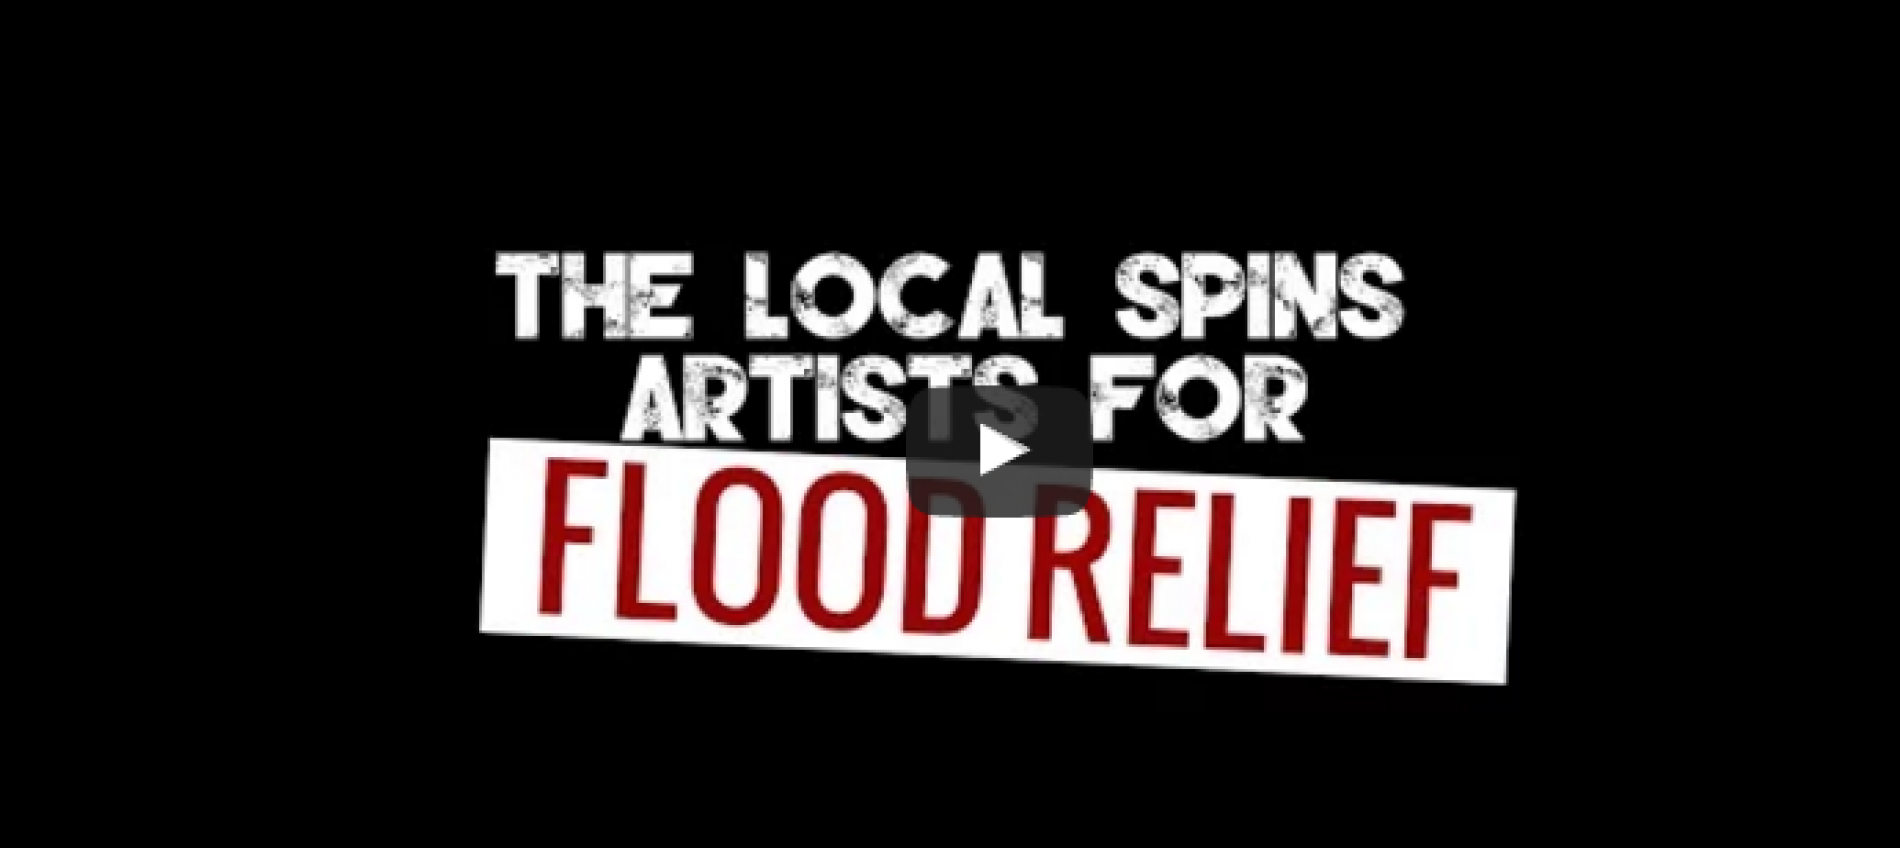 The Local Spins Artists For Flood Relief – We’re On Our Way